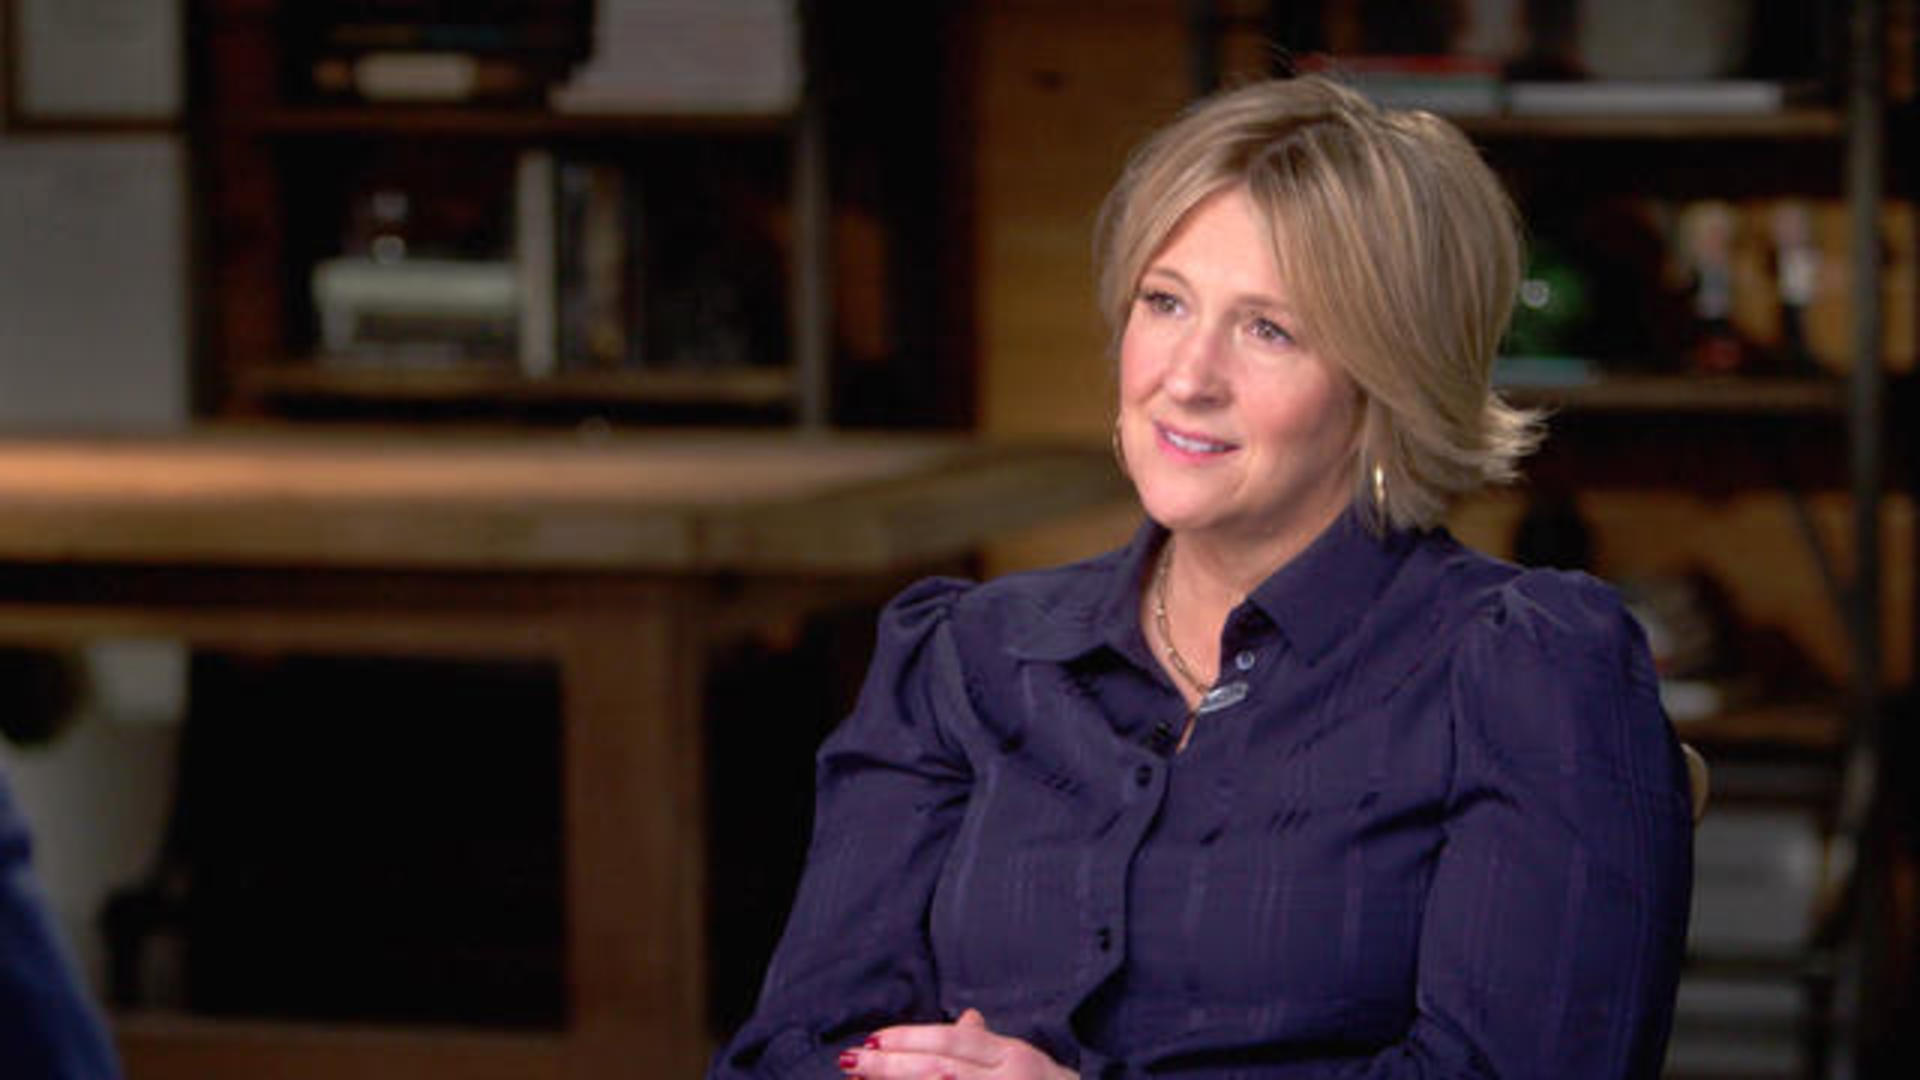 Brene Brown The 60 Minutes Interview Cbs News Images, Photos, Reviews